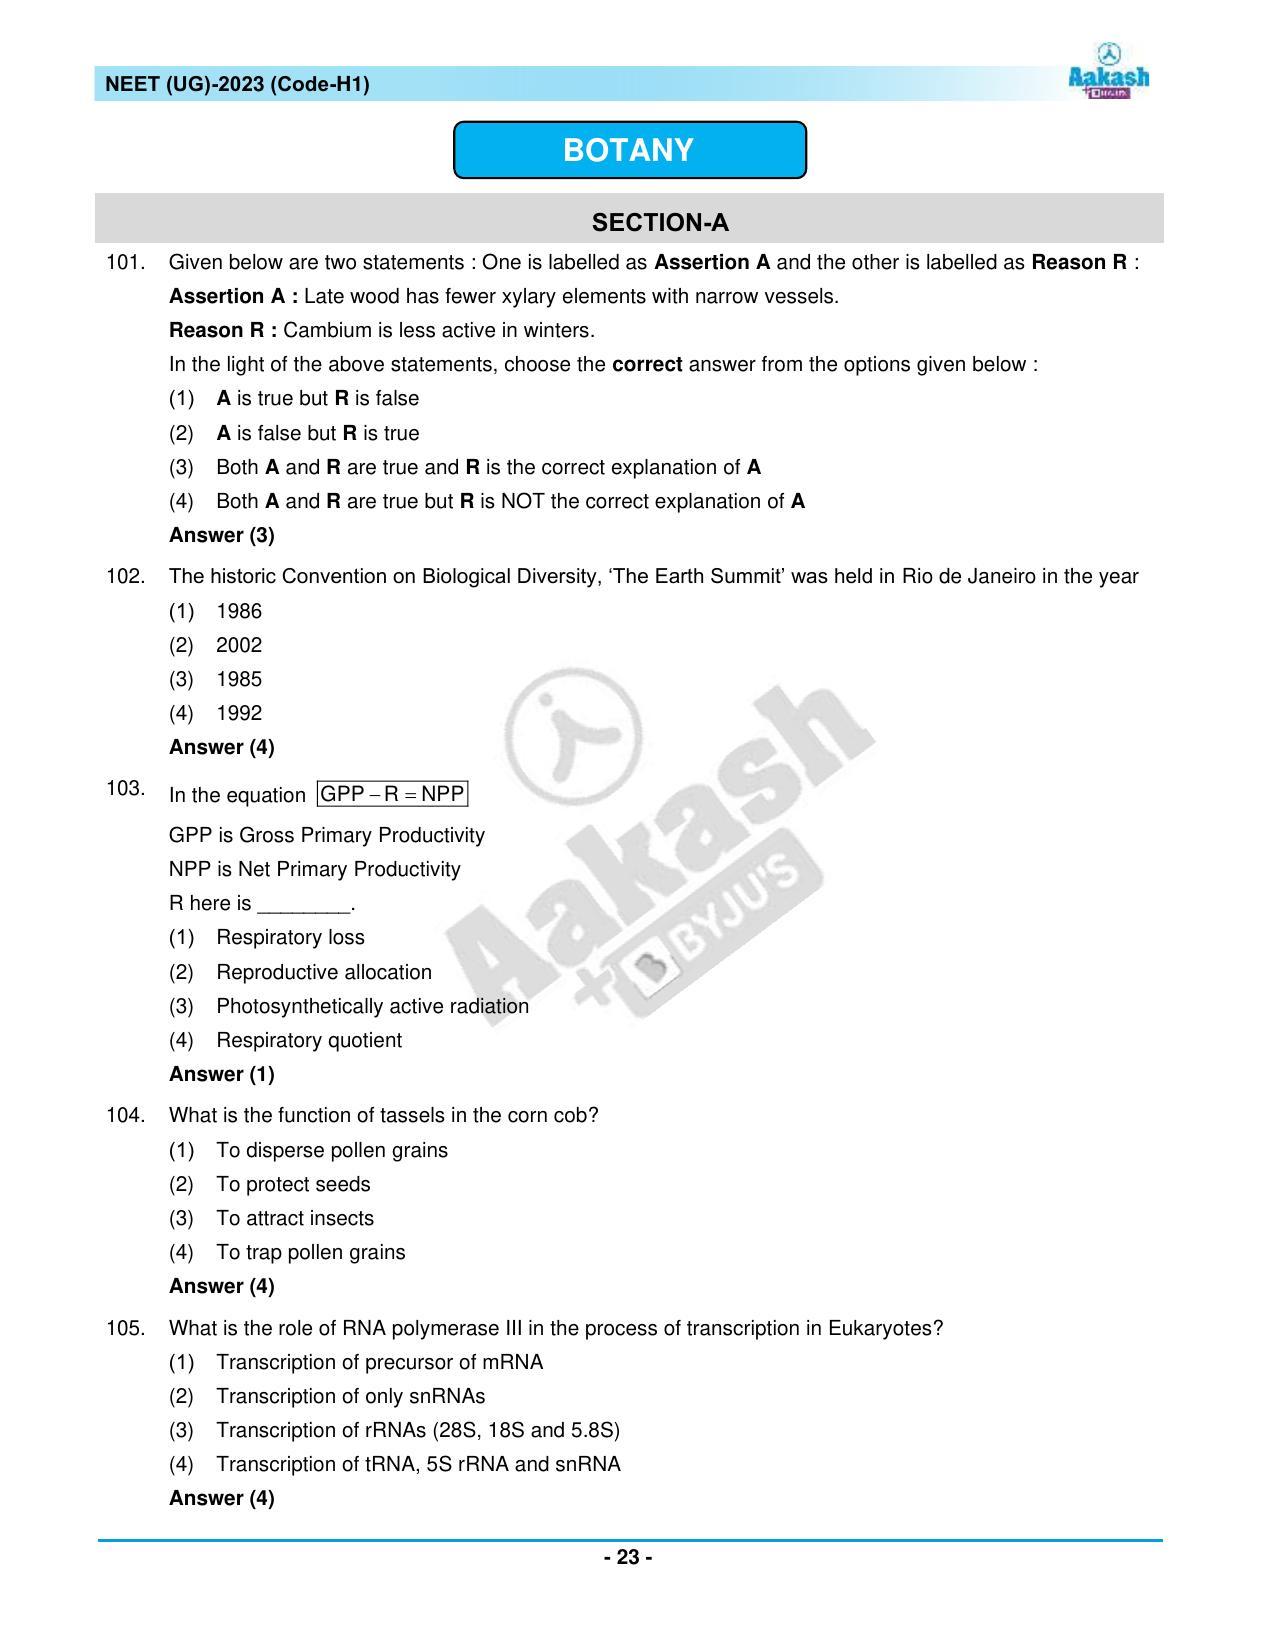 NEET 2023 Question Paper H1 - Page 23